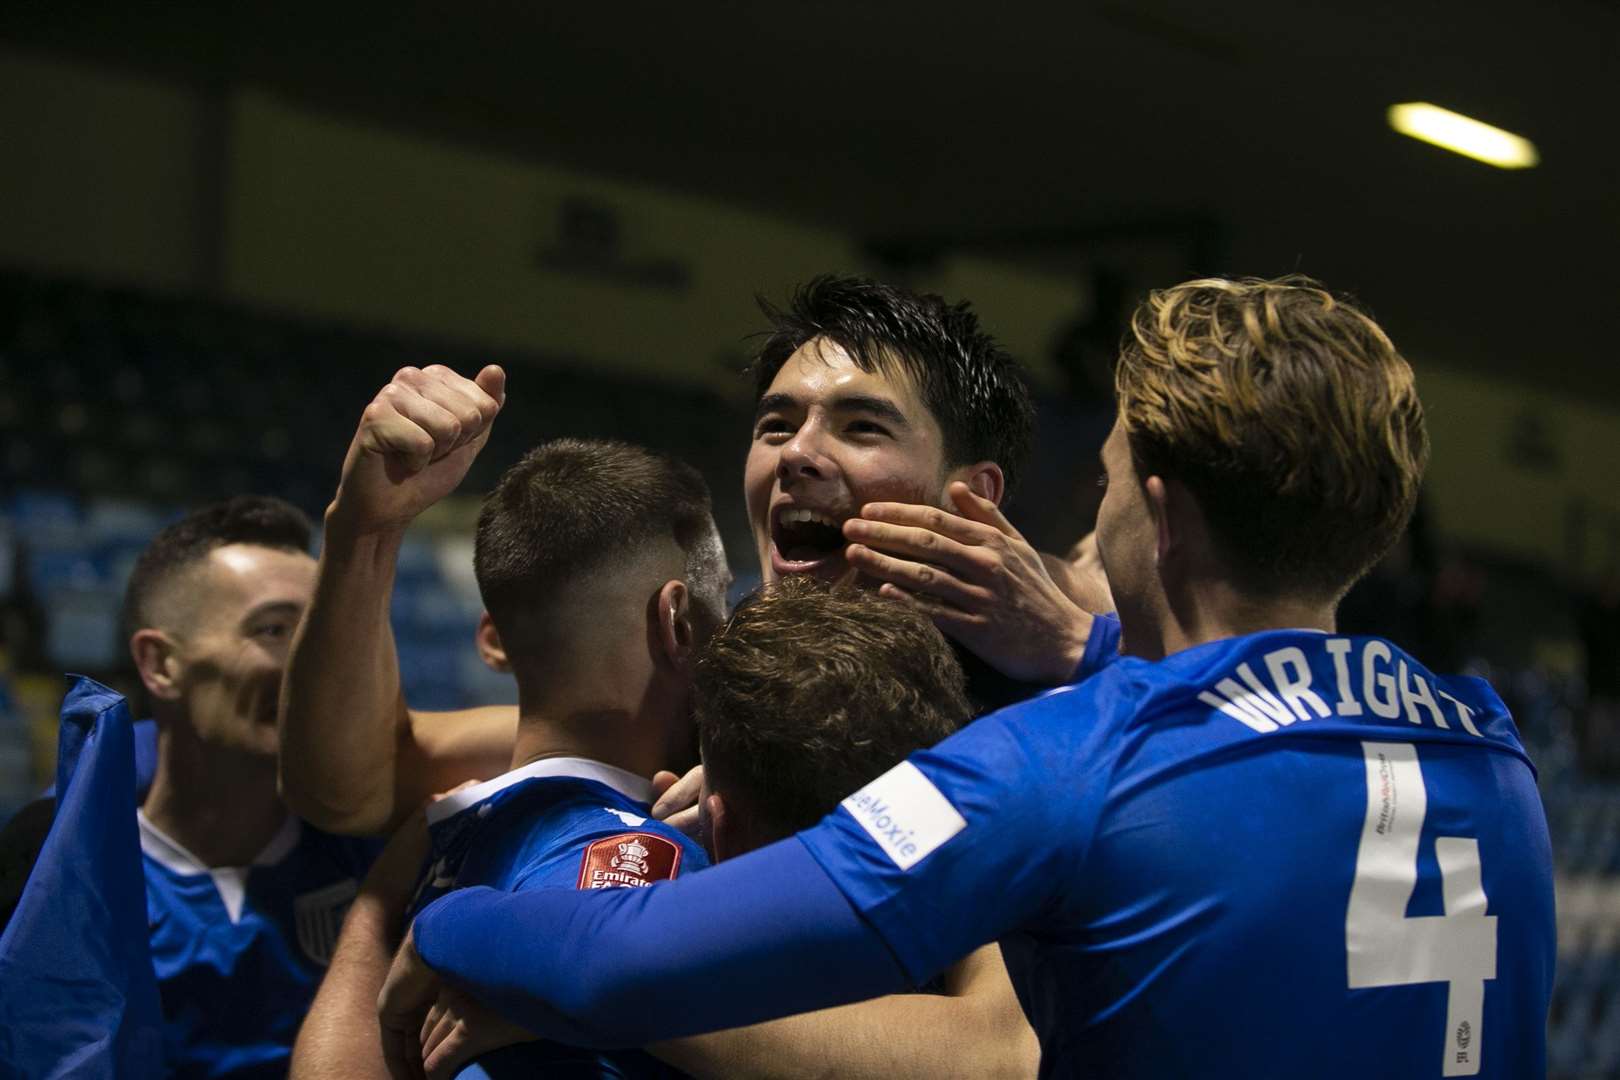 Gillingham beat Dagenham in the FA Cup Second Round replay